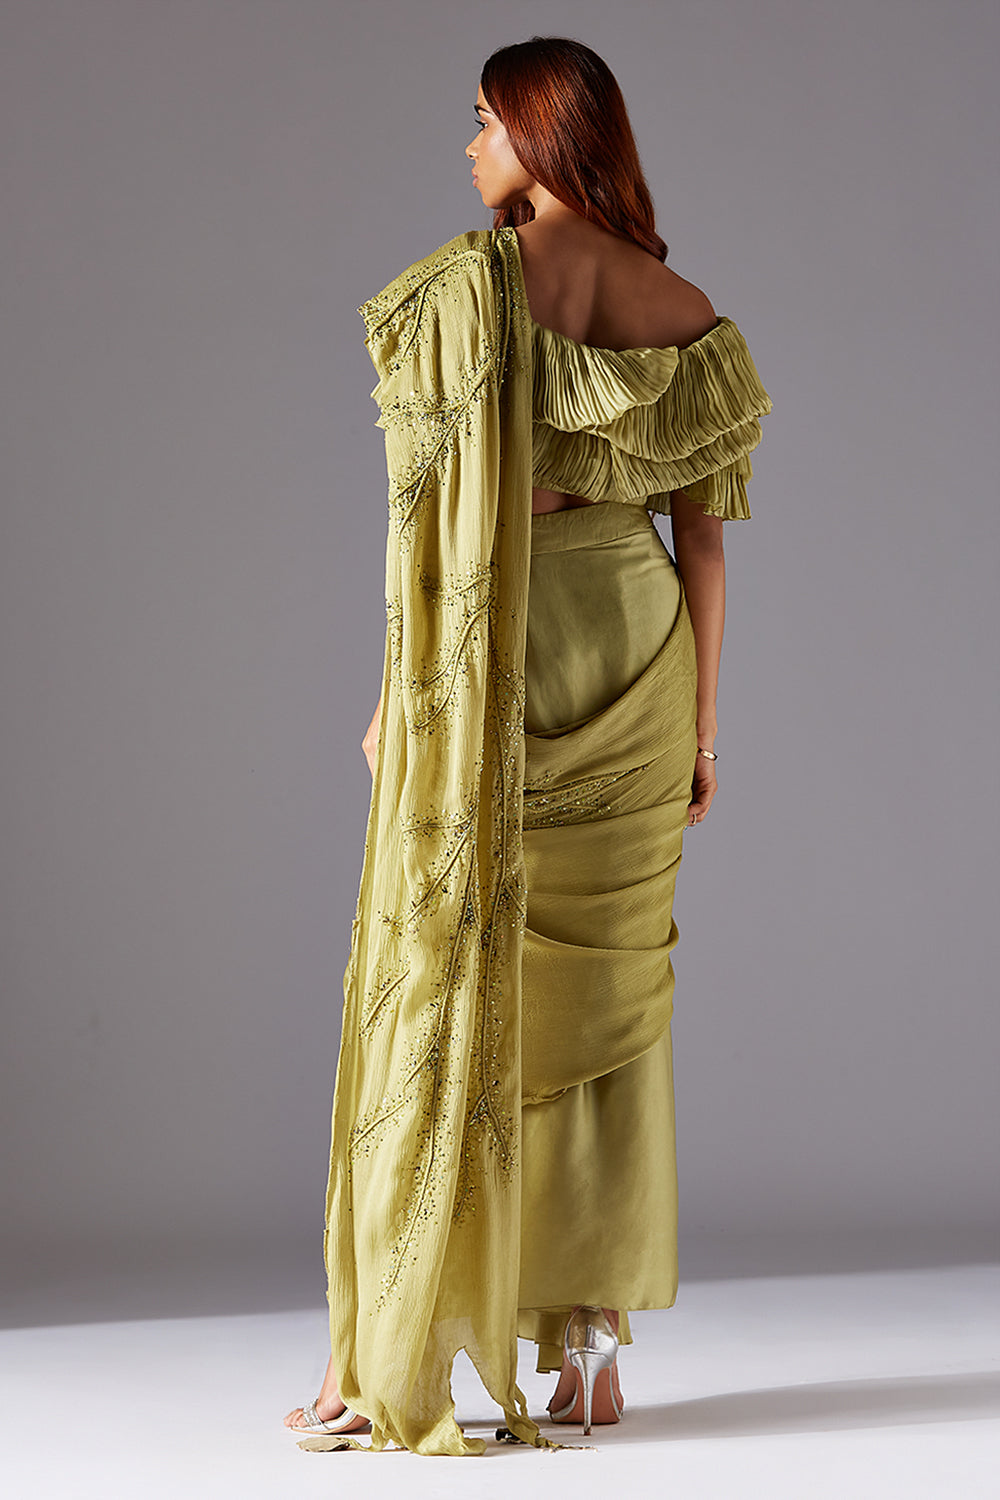 Gill Fungi Blouse With Draped Lungi Skirt and Living Stole- Dupatta